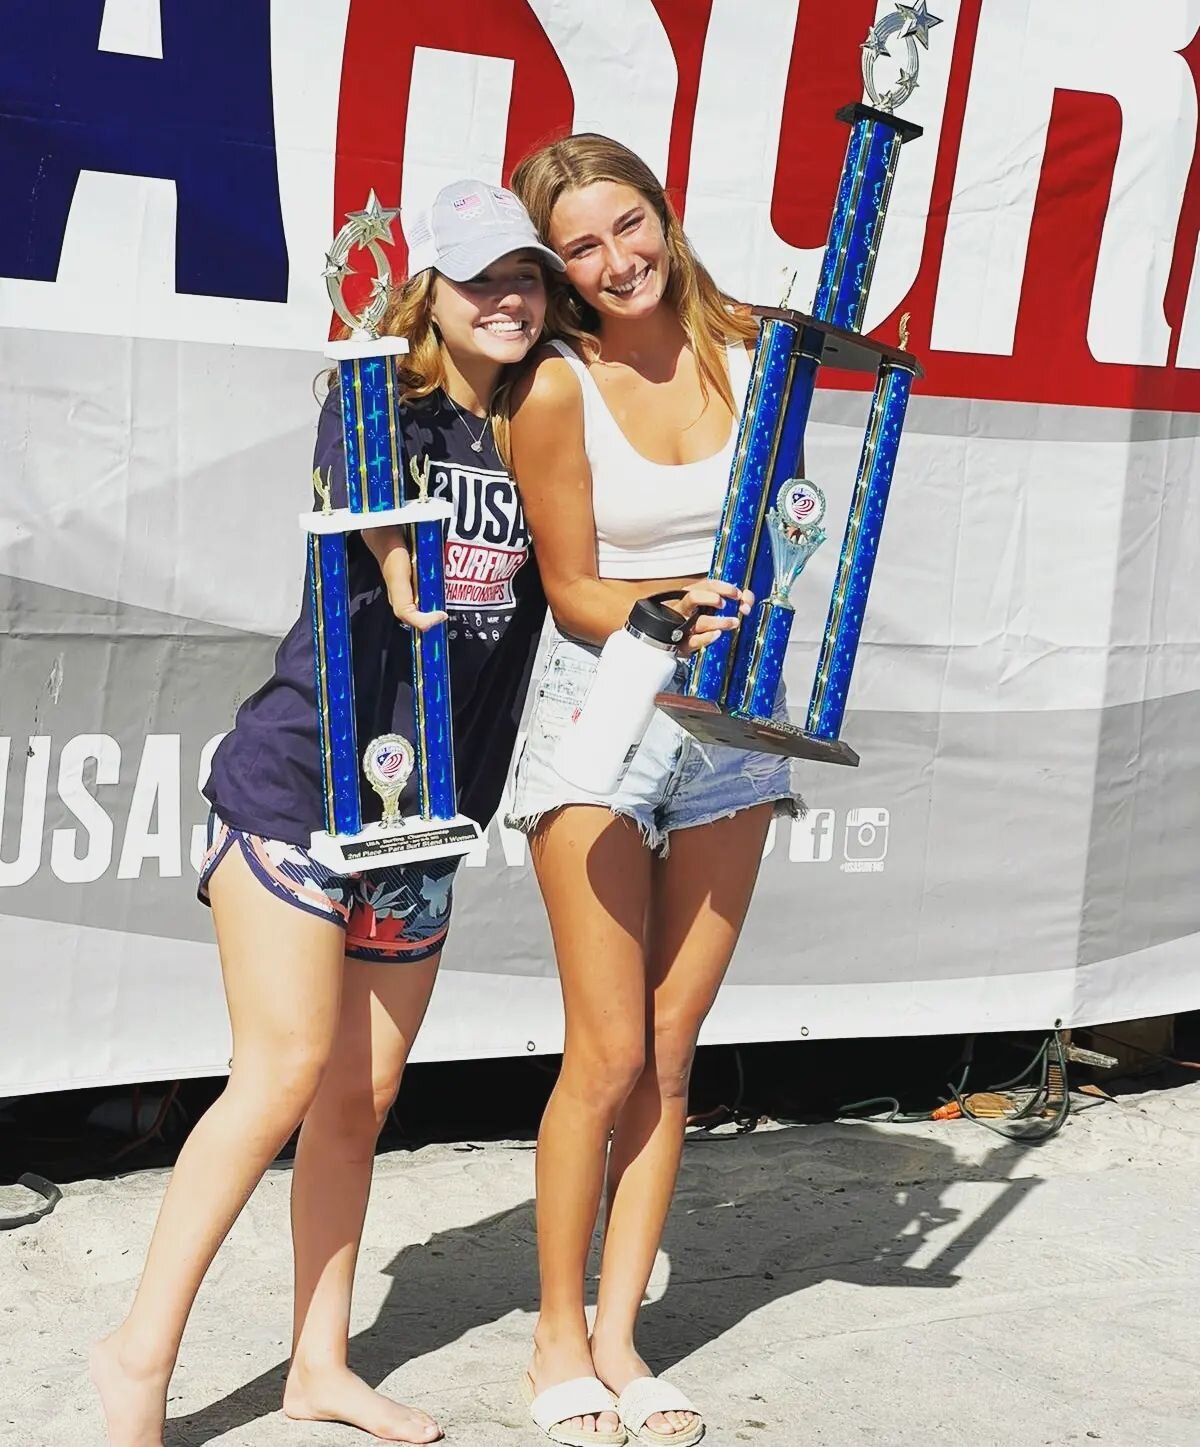 Congrats to all the @hawaiiadaptivesurfteam crew who competed in @usasurfing National Championships last weekend! @faithhopemaui got 1st again! (Id: image 1 faith &amp; @livstone hold their trophies and smile at the camera. Image 2 4 wheelchair users